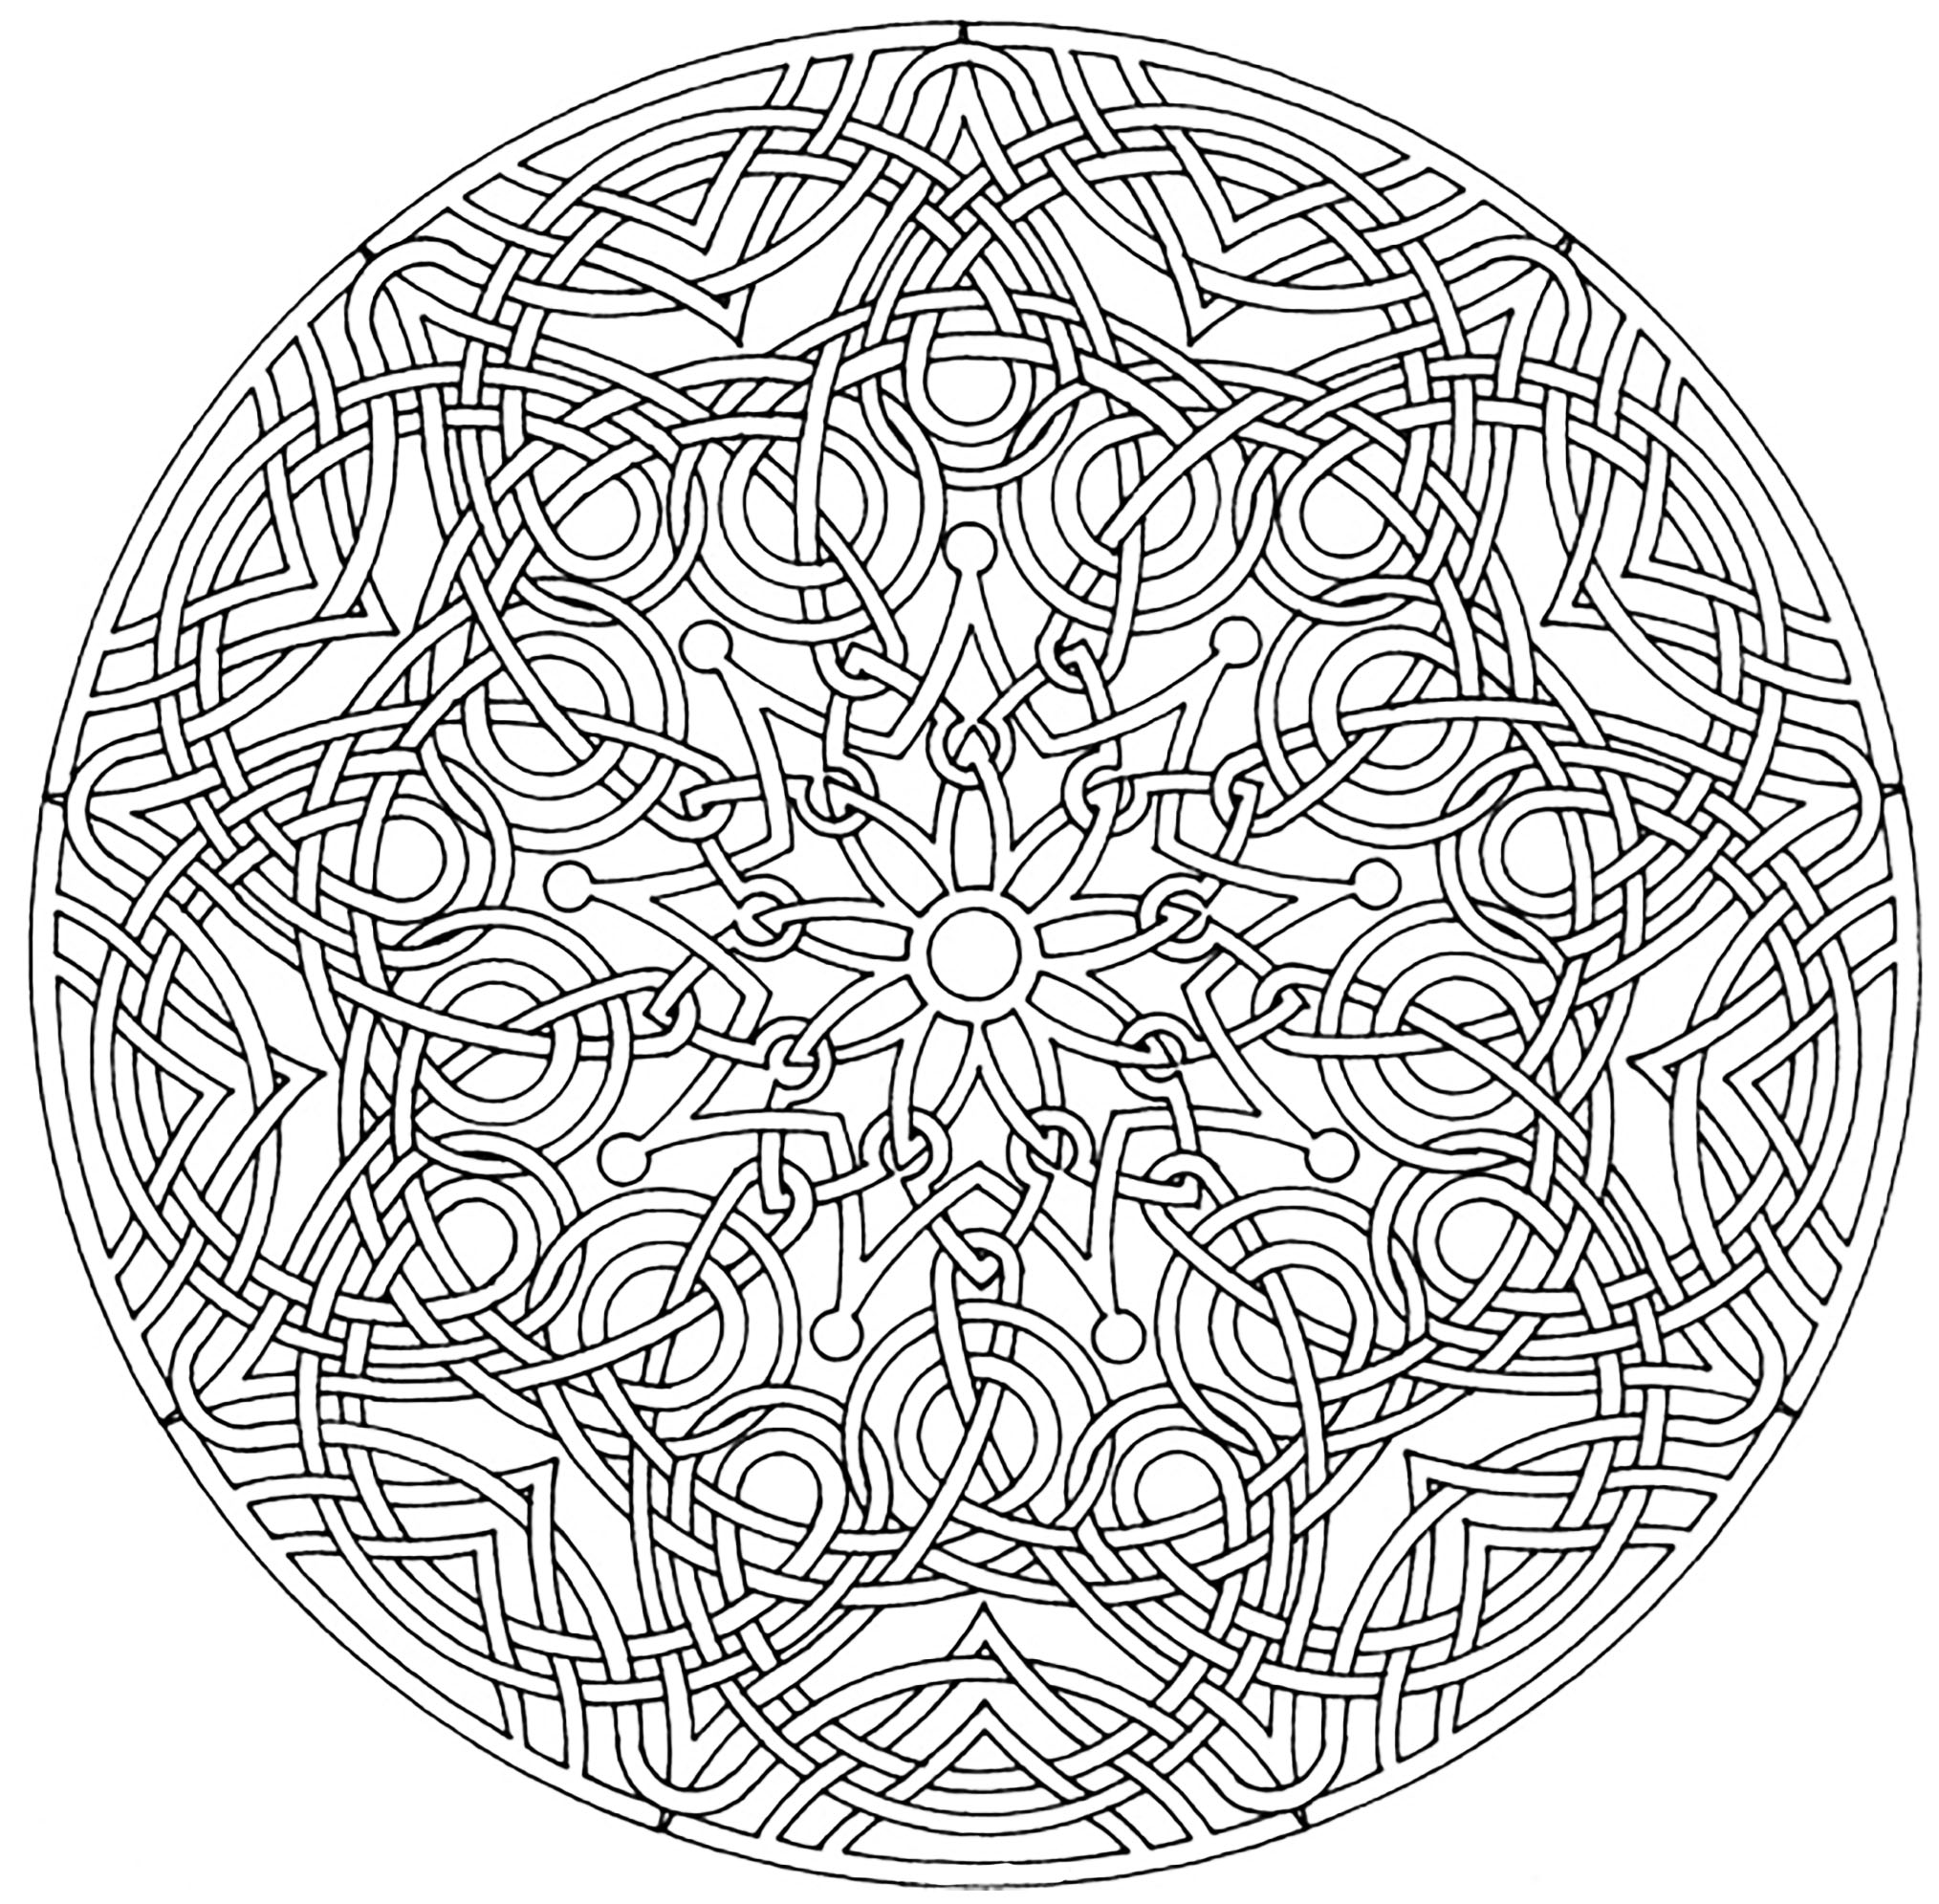 Many small patterns and little details for a Mandala coloring page of good quality. Still your mind : this step is essential to get the most out of coloring to reduce your anxiety